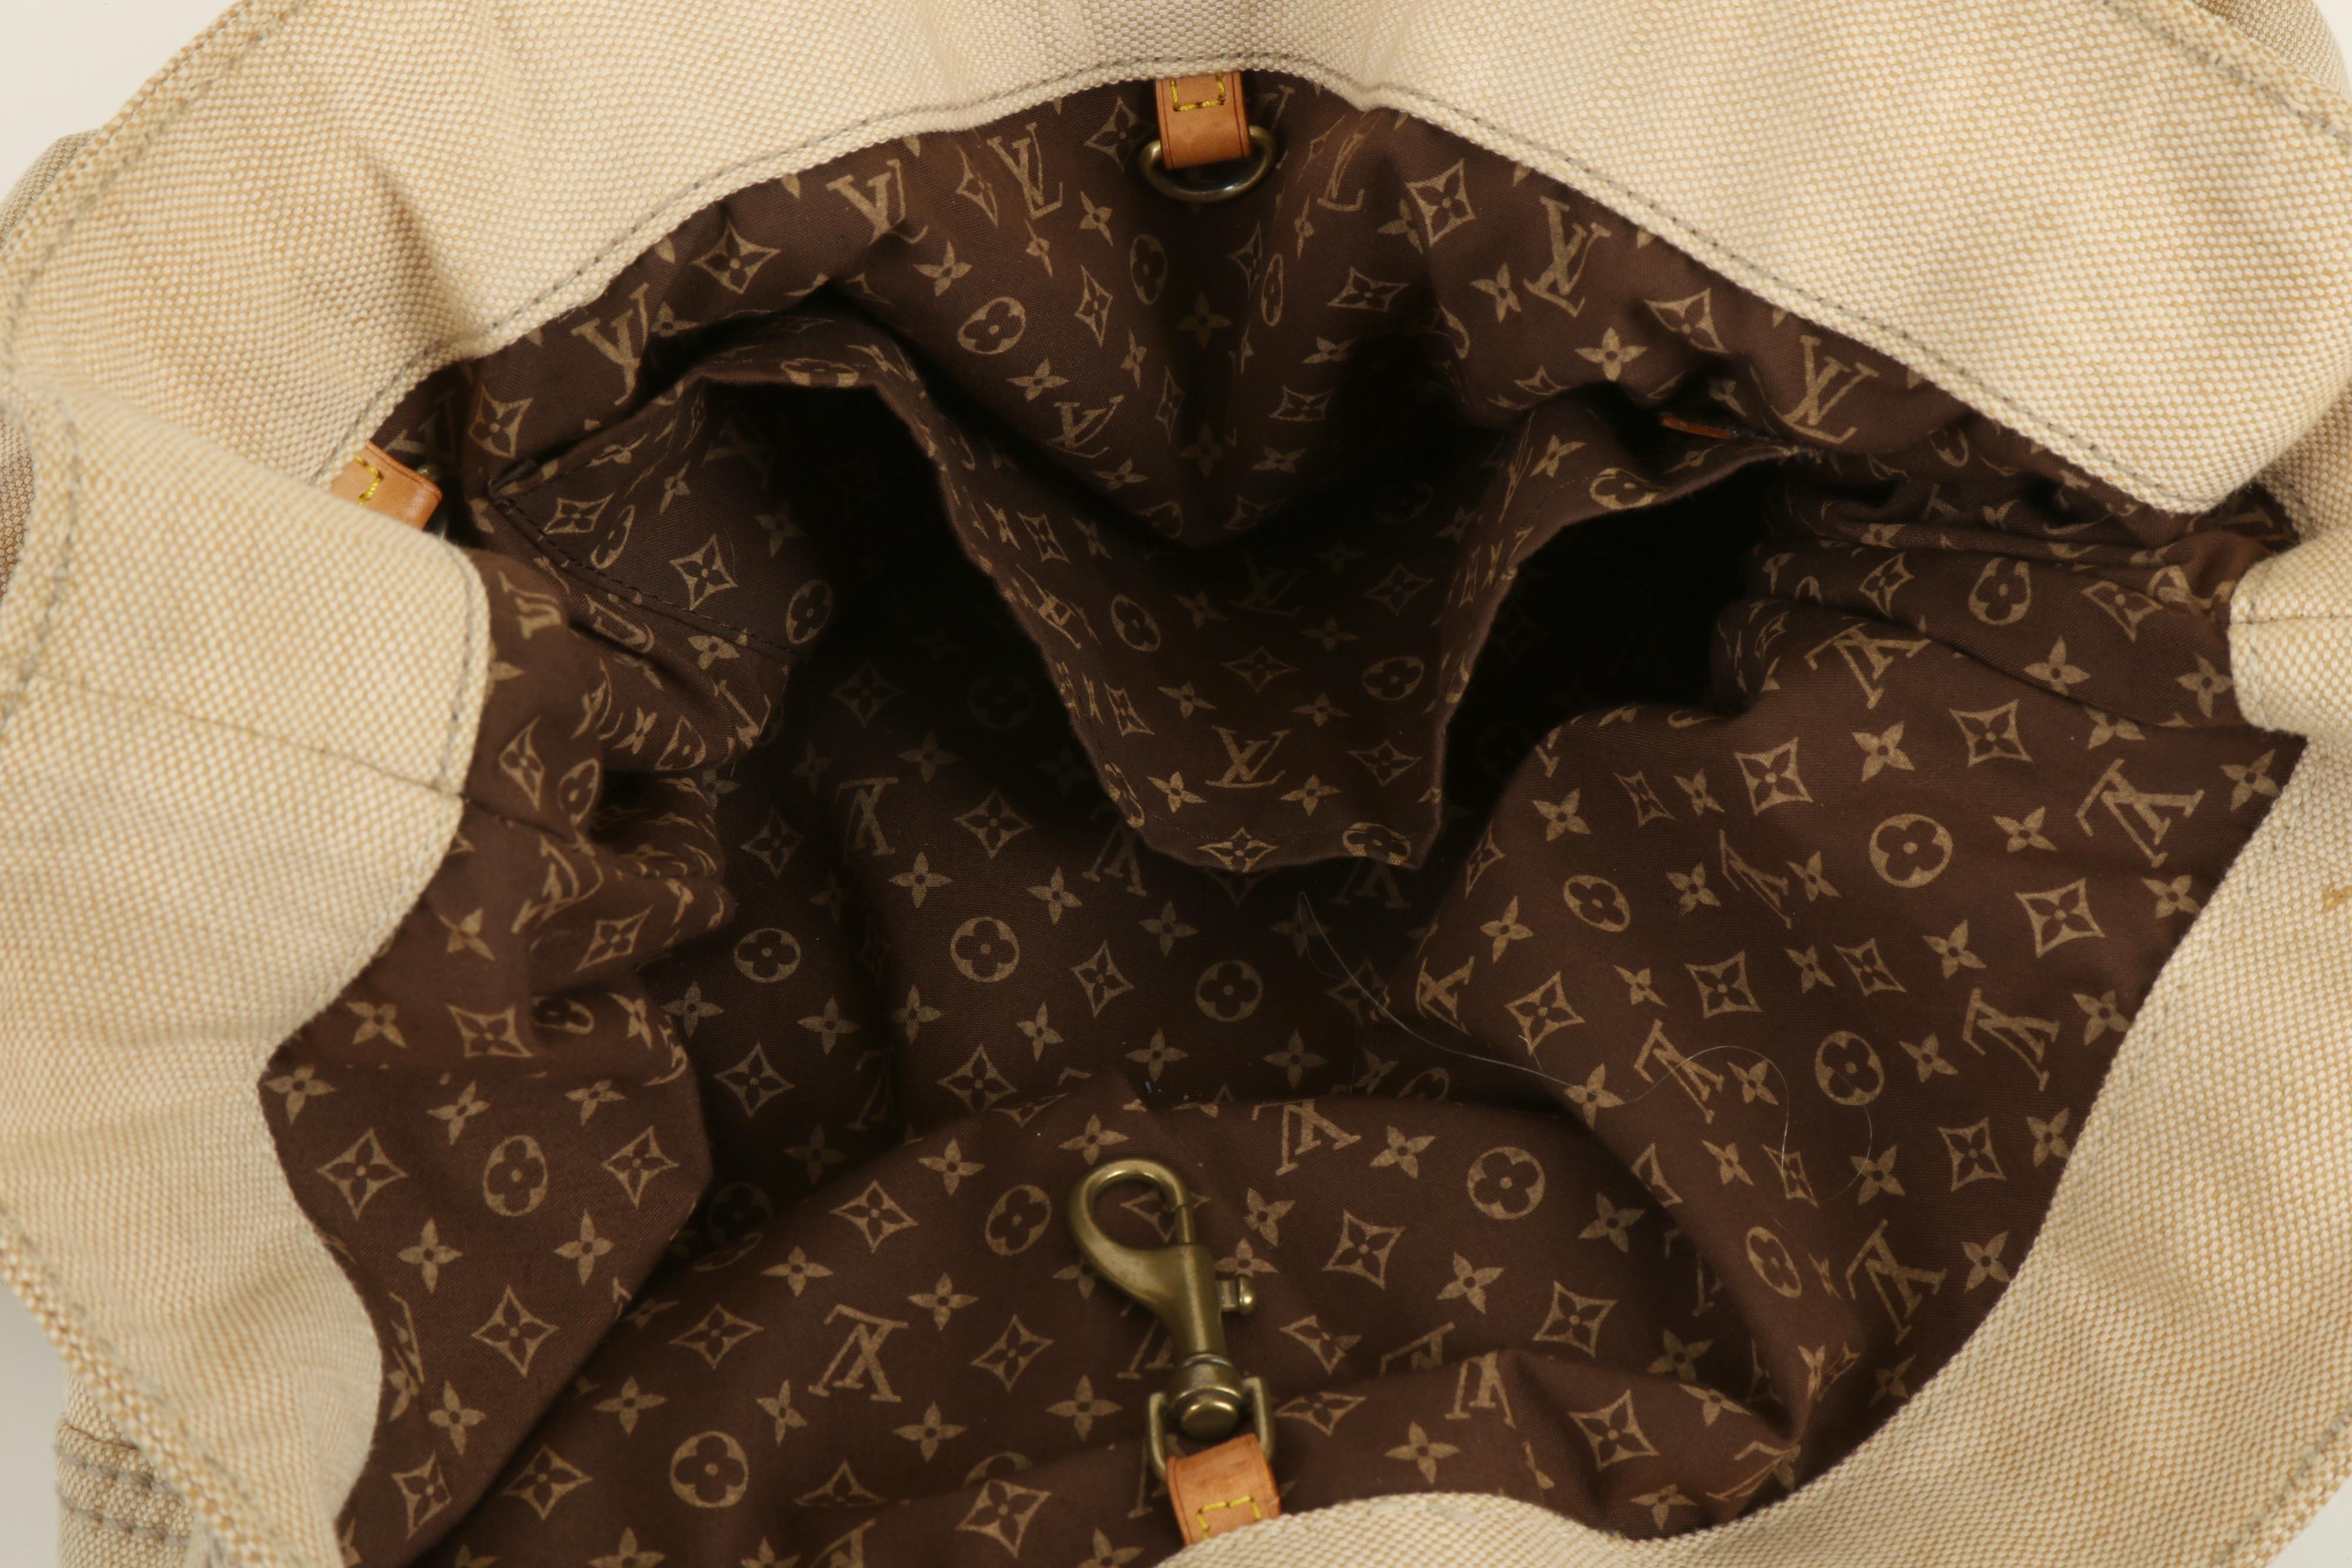 Louis Vuitton Scarf Globe Shopper TRUNKS & BAGS Used From